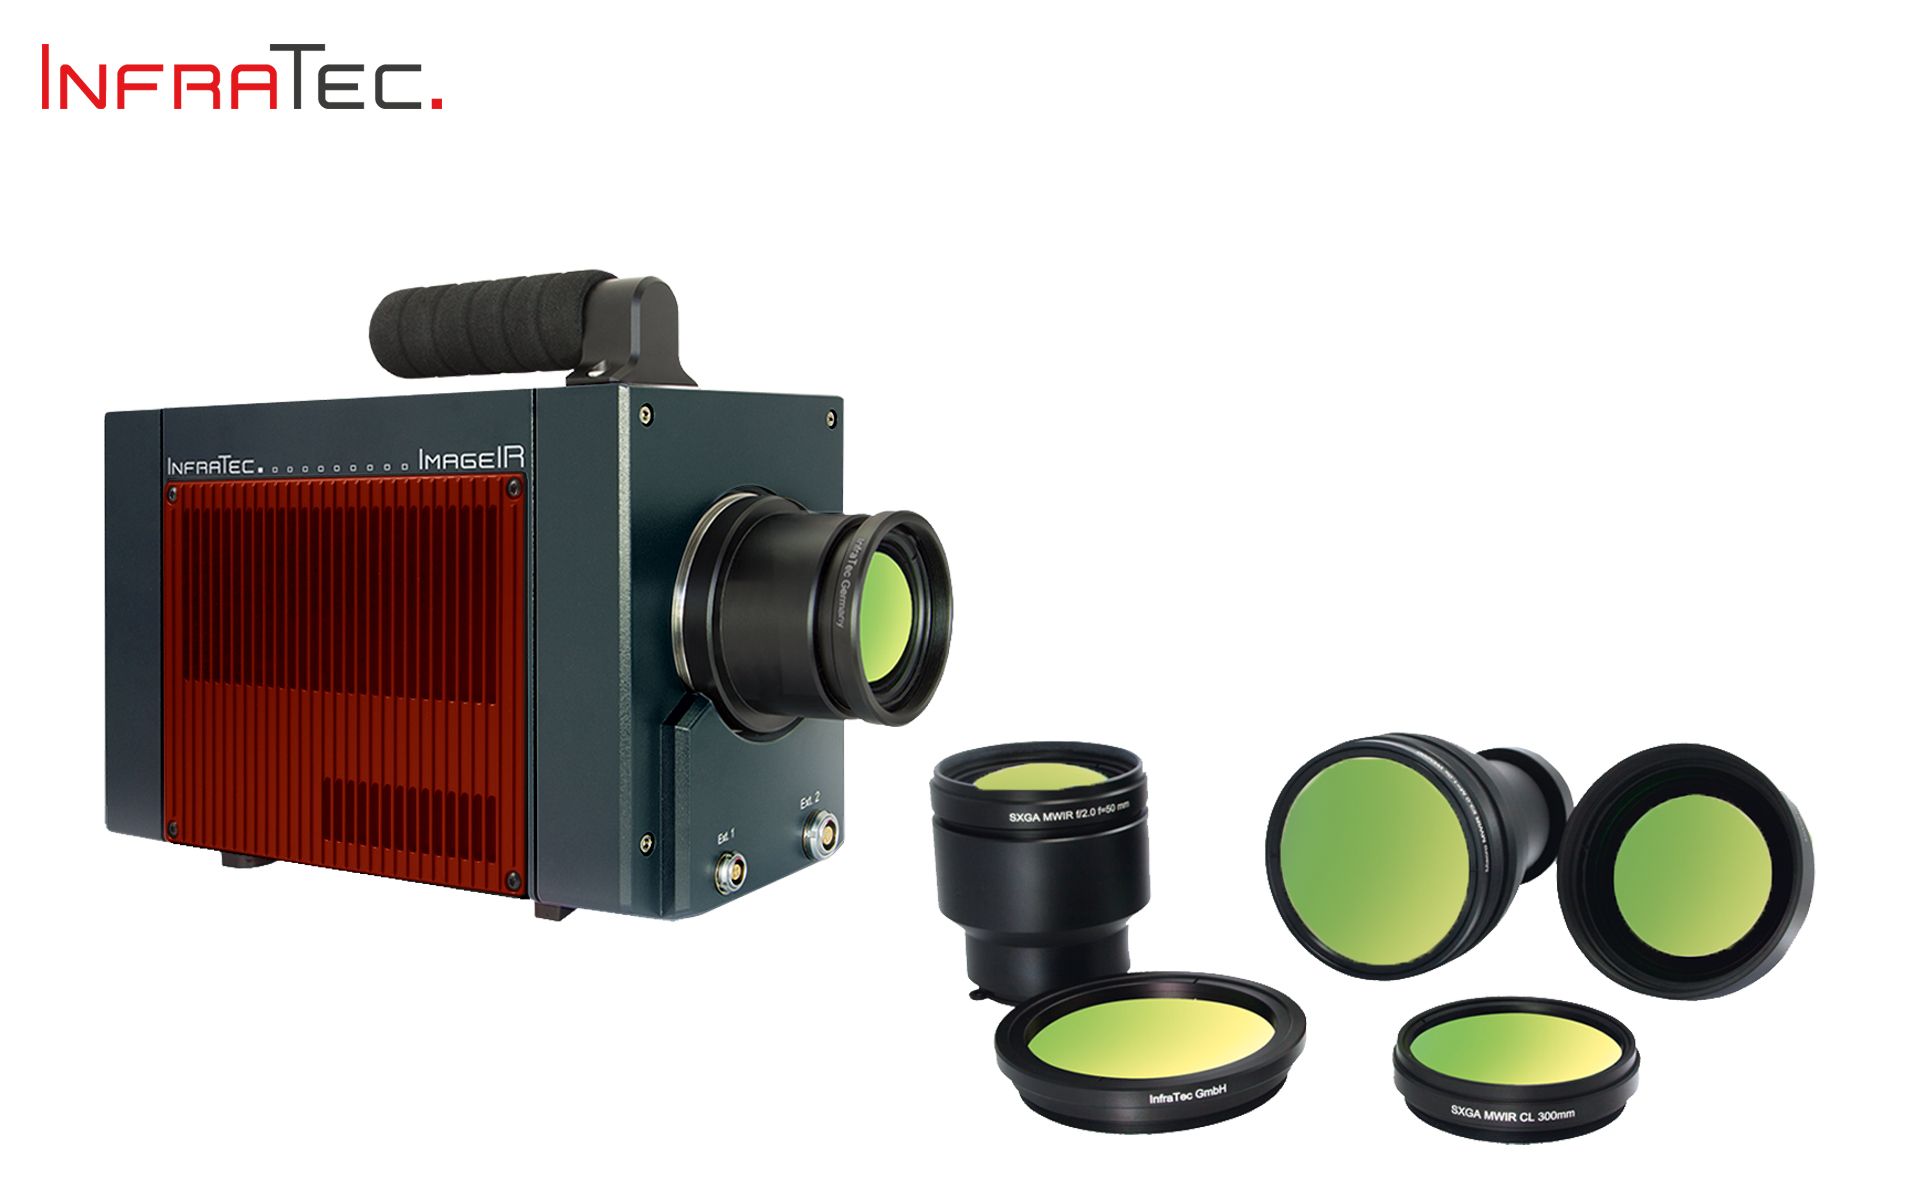 infratec_imageir_9400-hp_lenses Blog - Tech Imaging Services